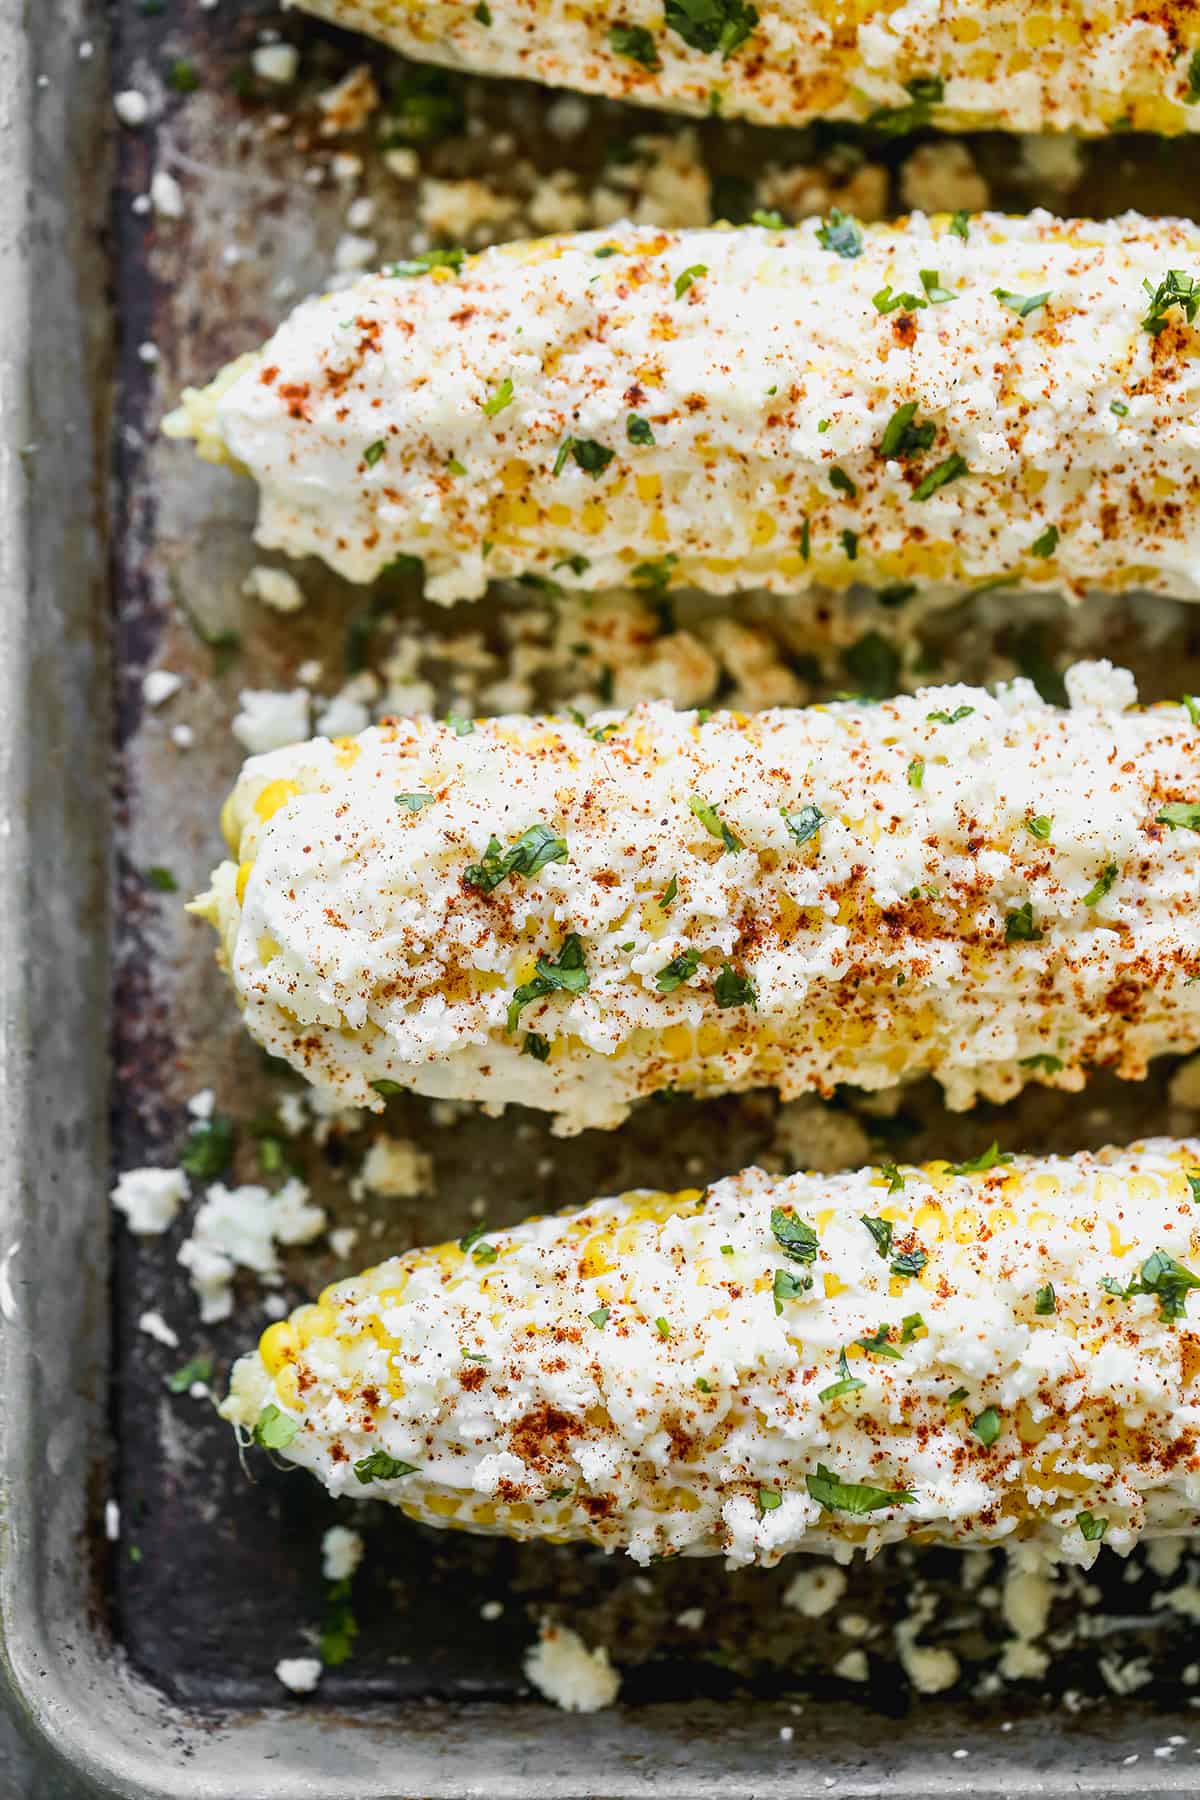 A close-up image of Elote, or Mexican Street corn, ready to enjoy.